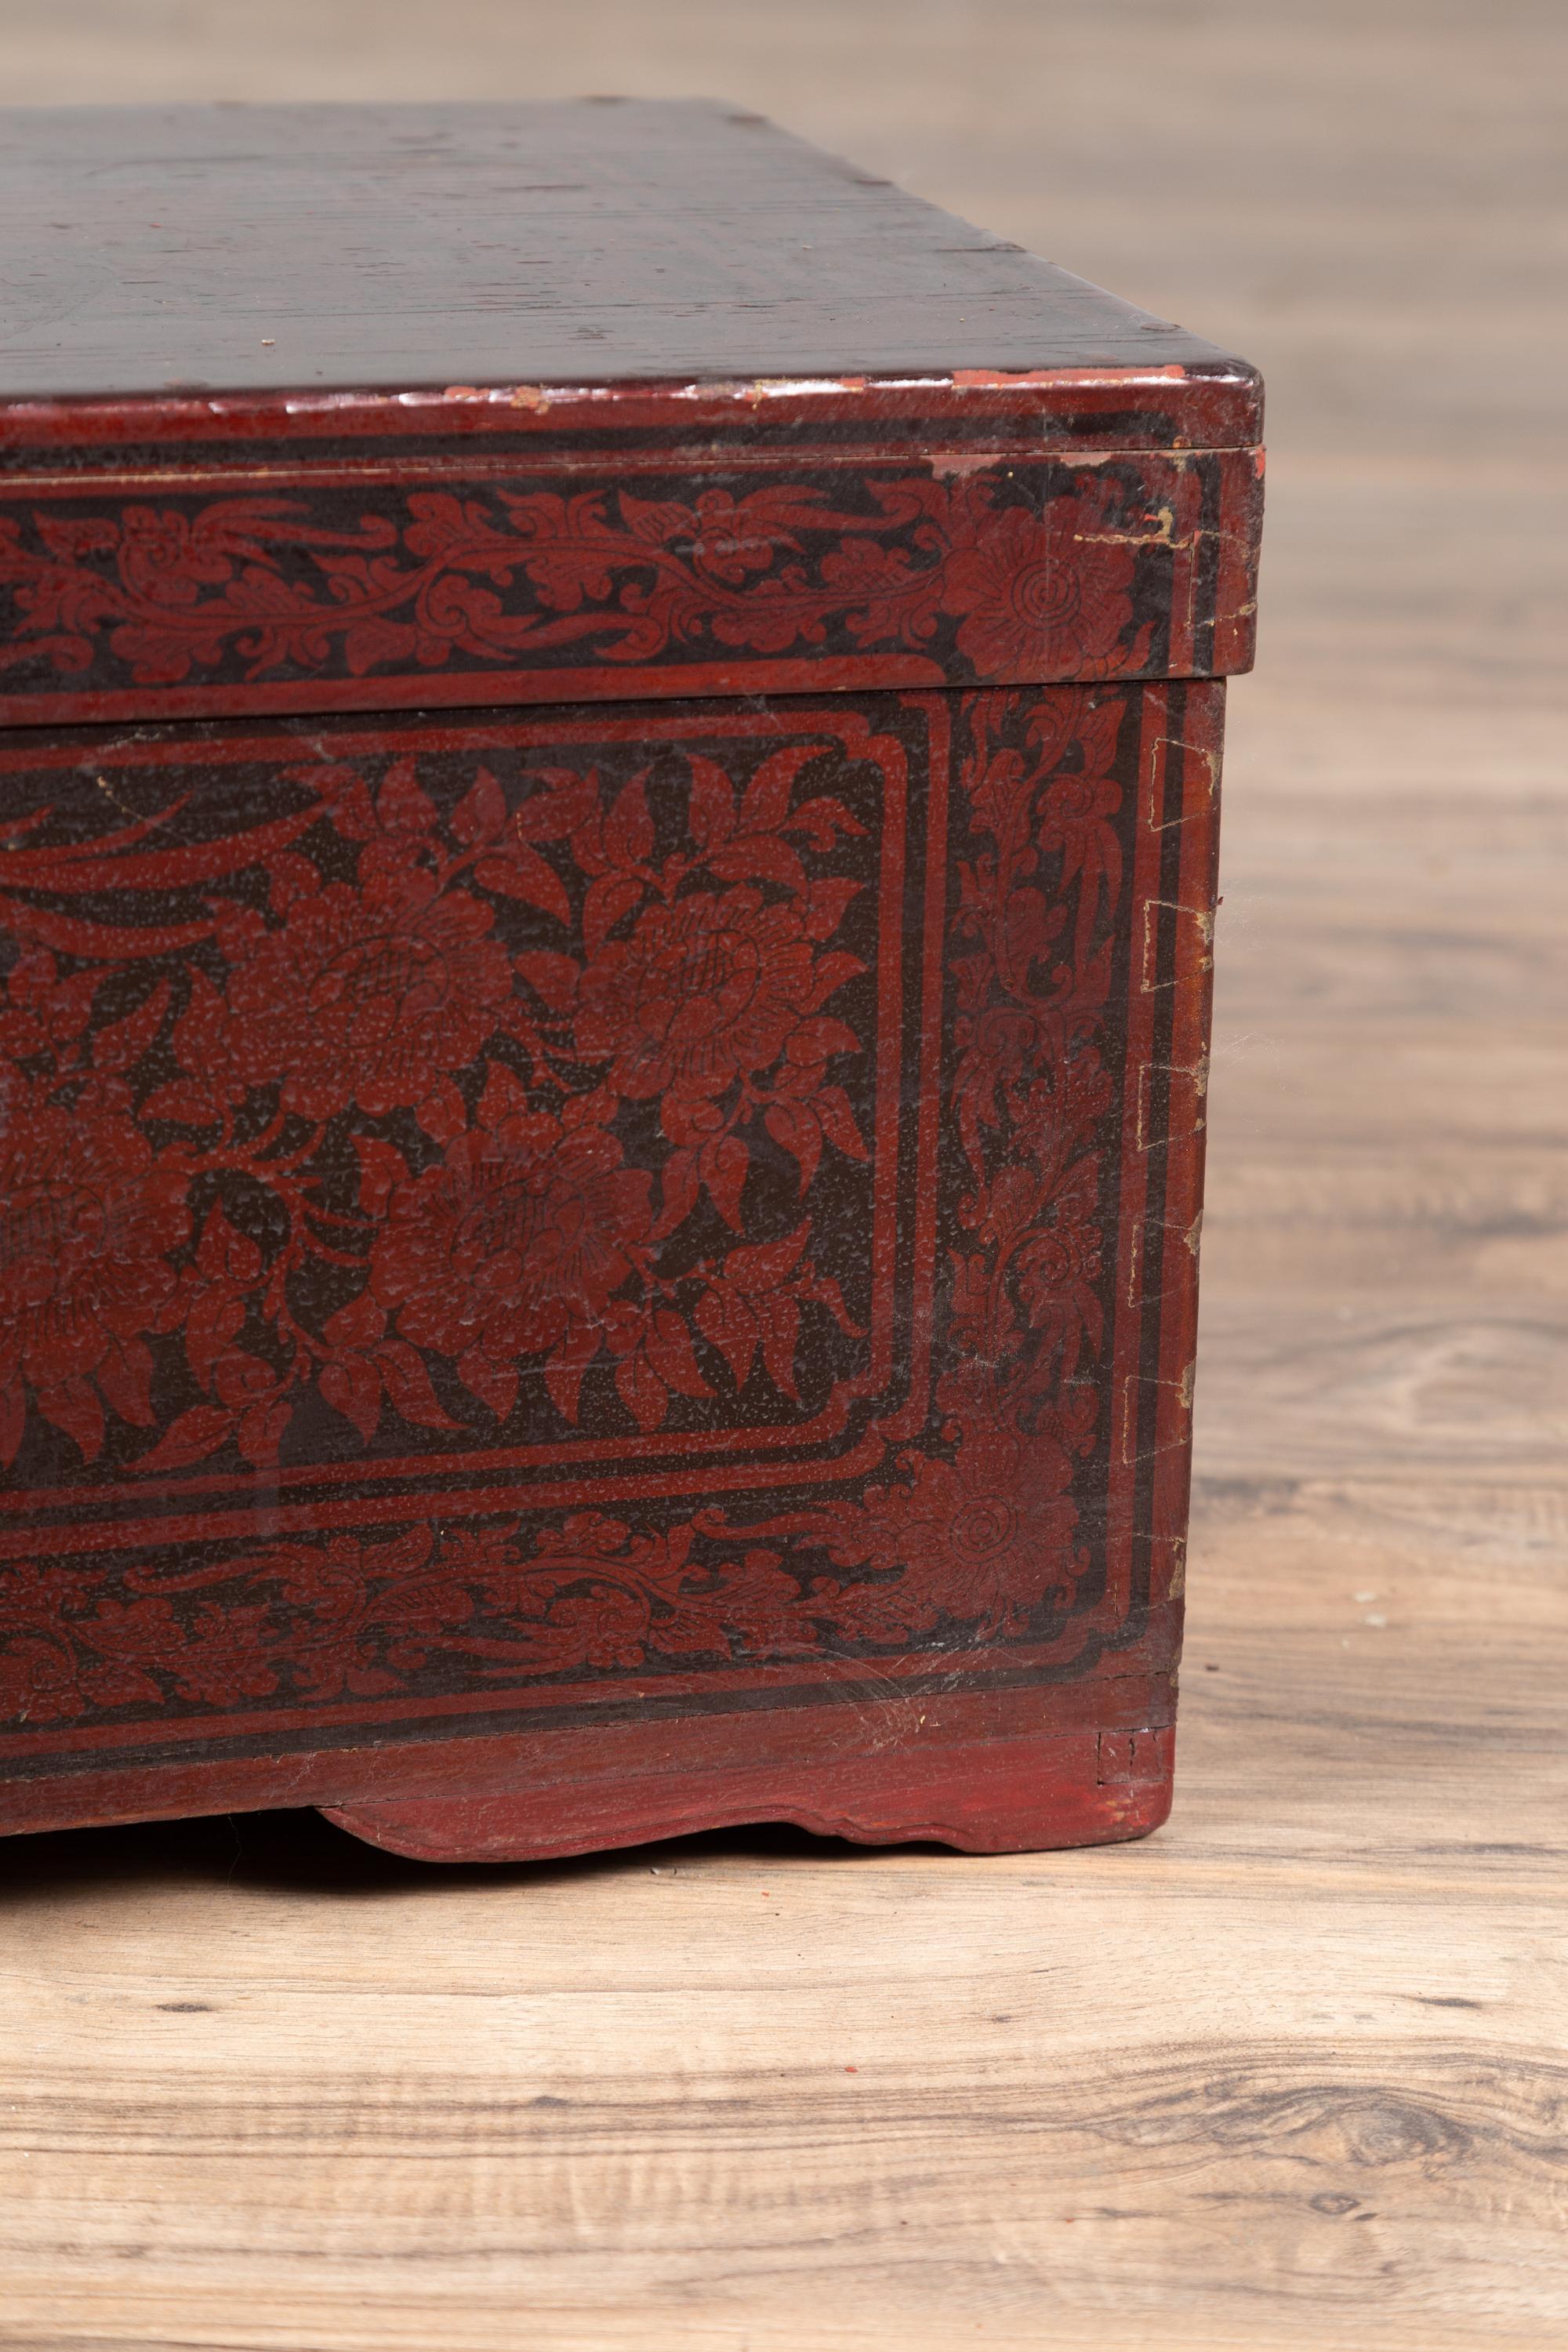 Vintage Lacquered Leather Chest with Burgundy Patina from Palembang, Sumatra 3